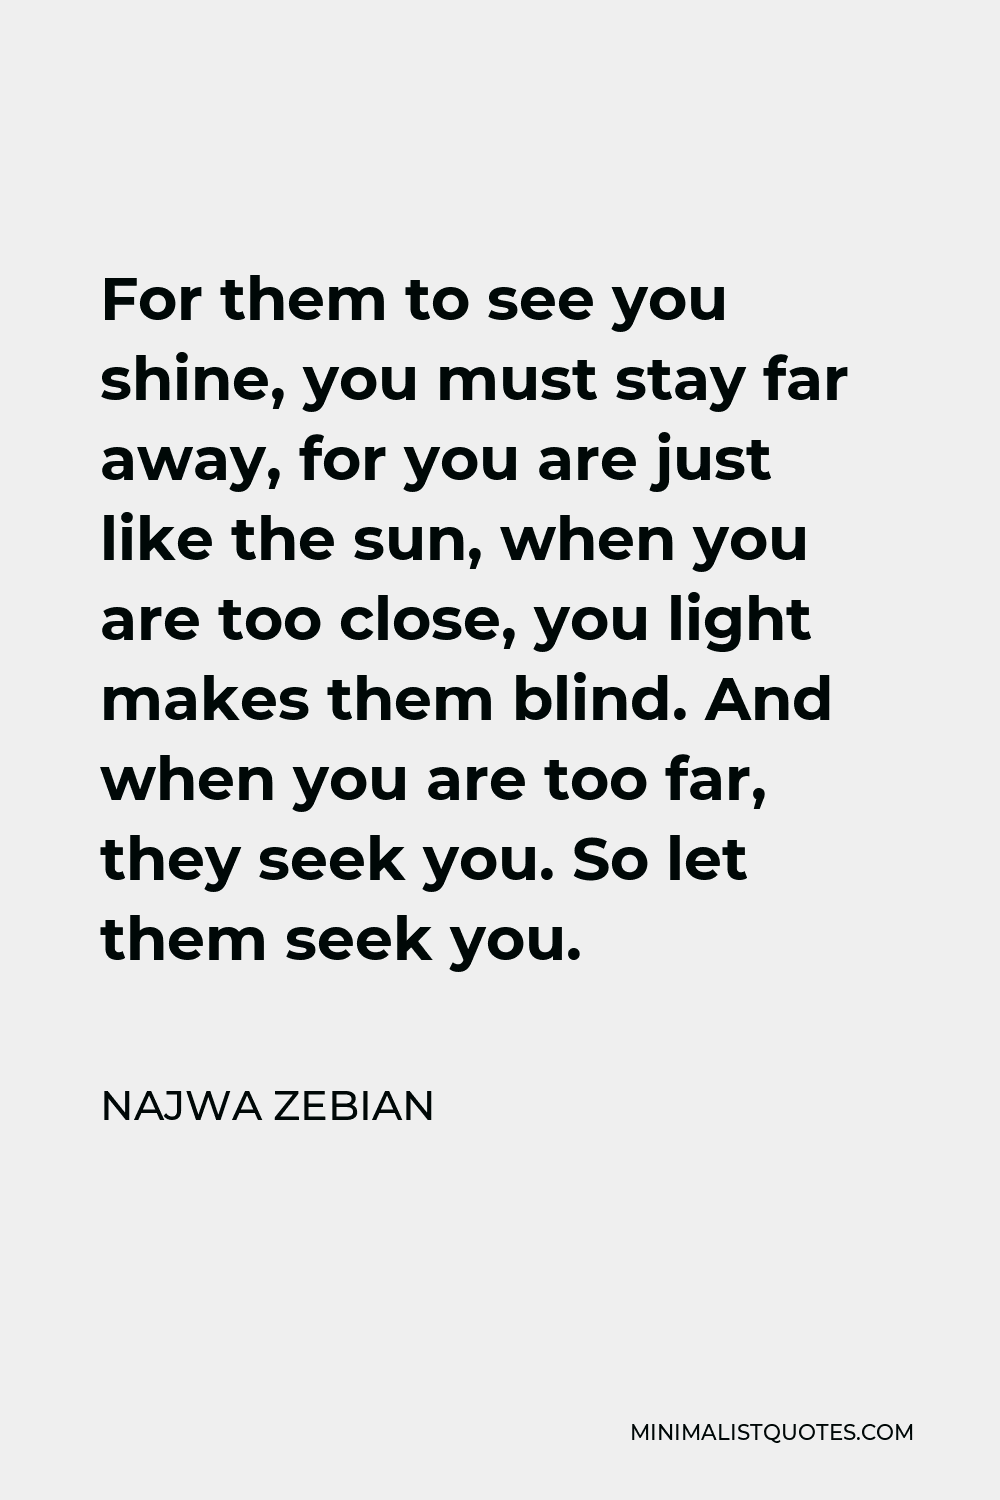 Najwa Zebian Quote - For them to see you shine, you must stay far away, for you are just like the sun, when you are too close, you light makes them blind. And when you are too far, they seek you. So let them seek you.